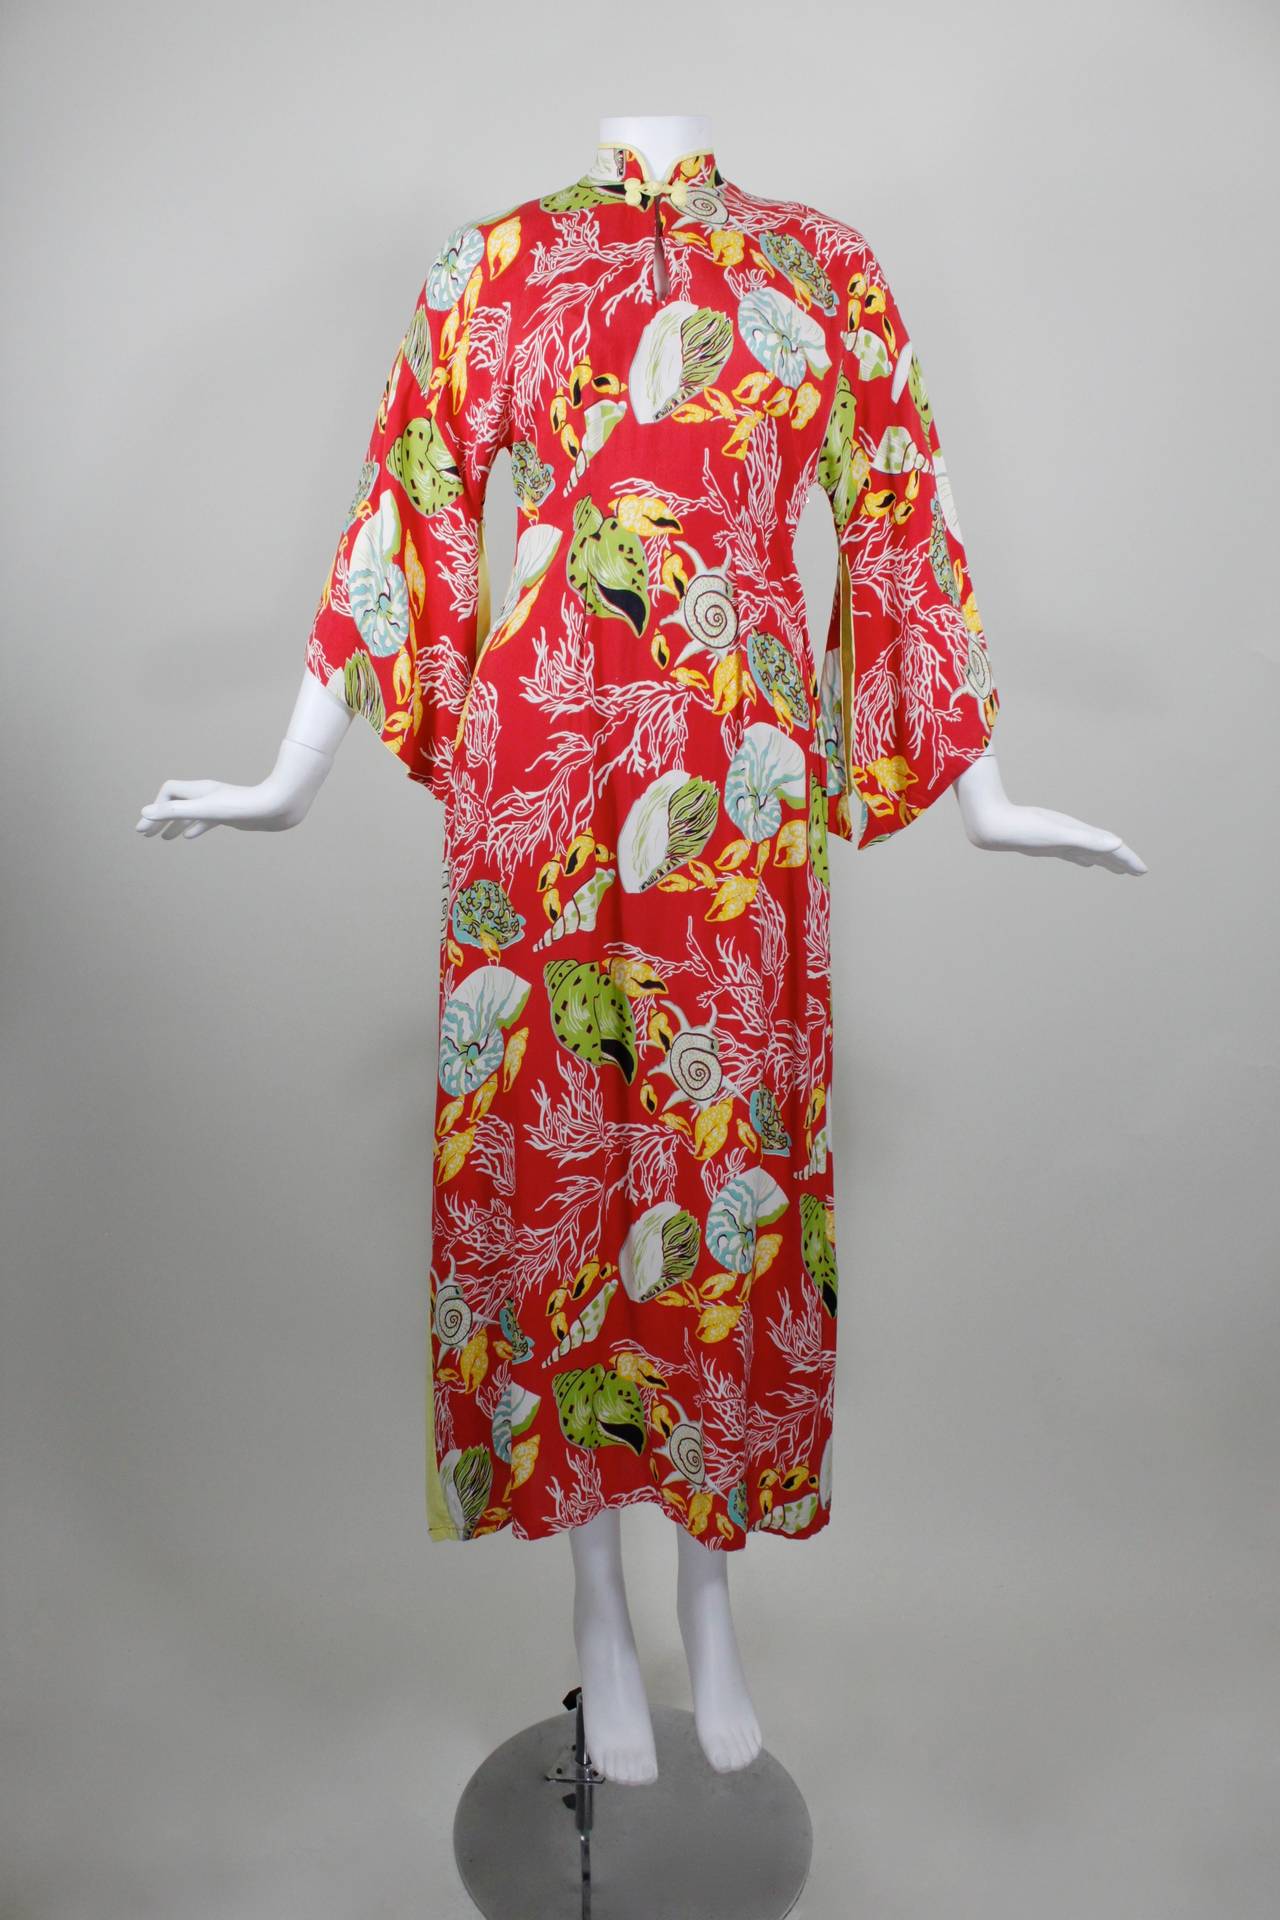 This 1940s Hawaiian rayon gown features a wonderful, bold aquatic print in the most fabulous and vibrant colors. A variety of large-scale shells pop against a red background.

-Fully lined
-Side zip
-Minimal color